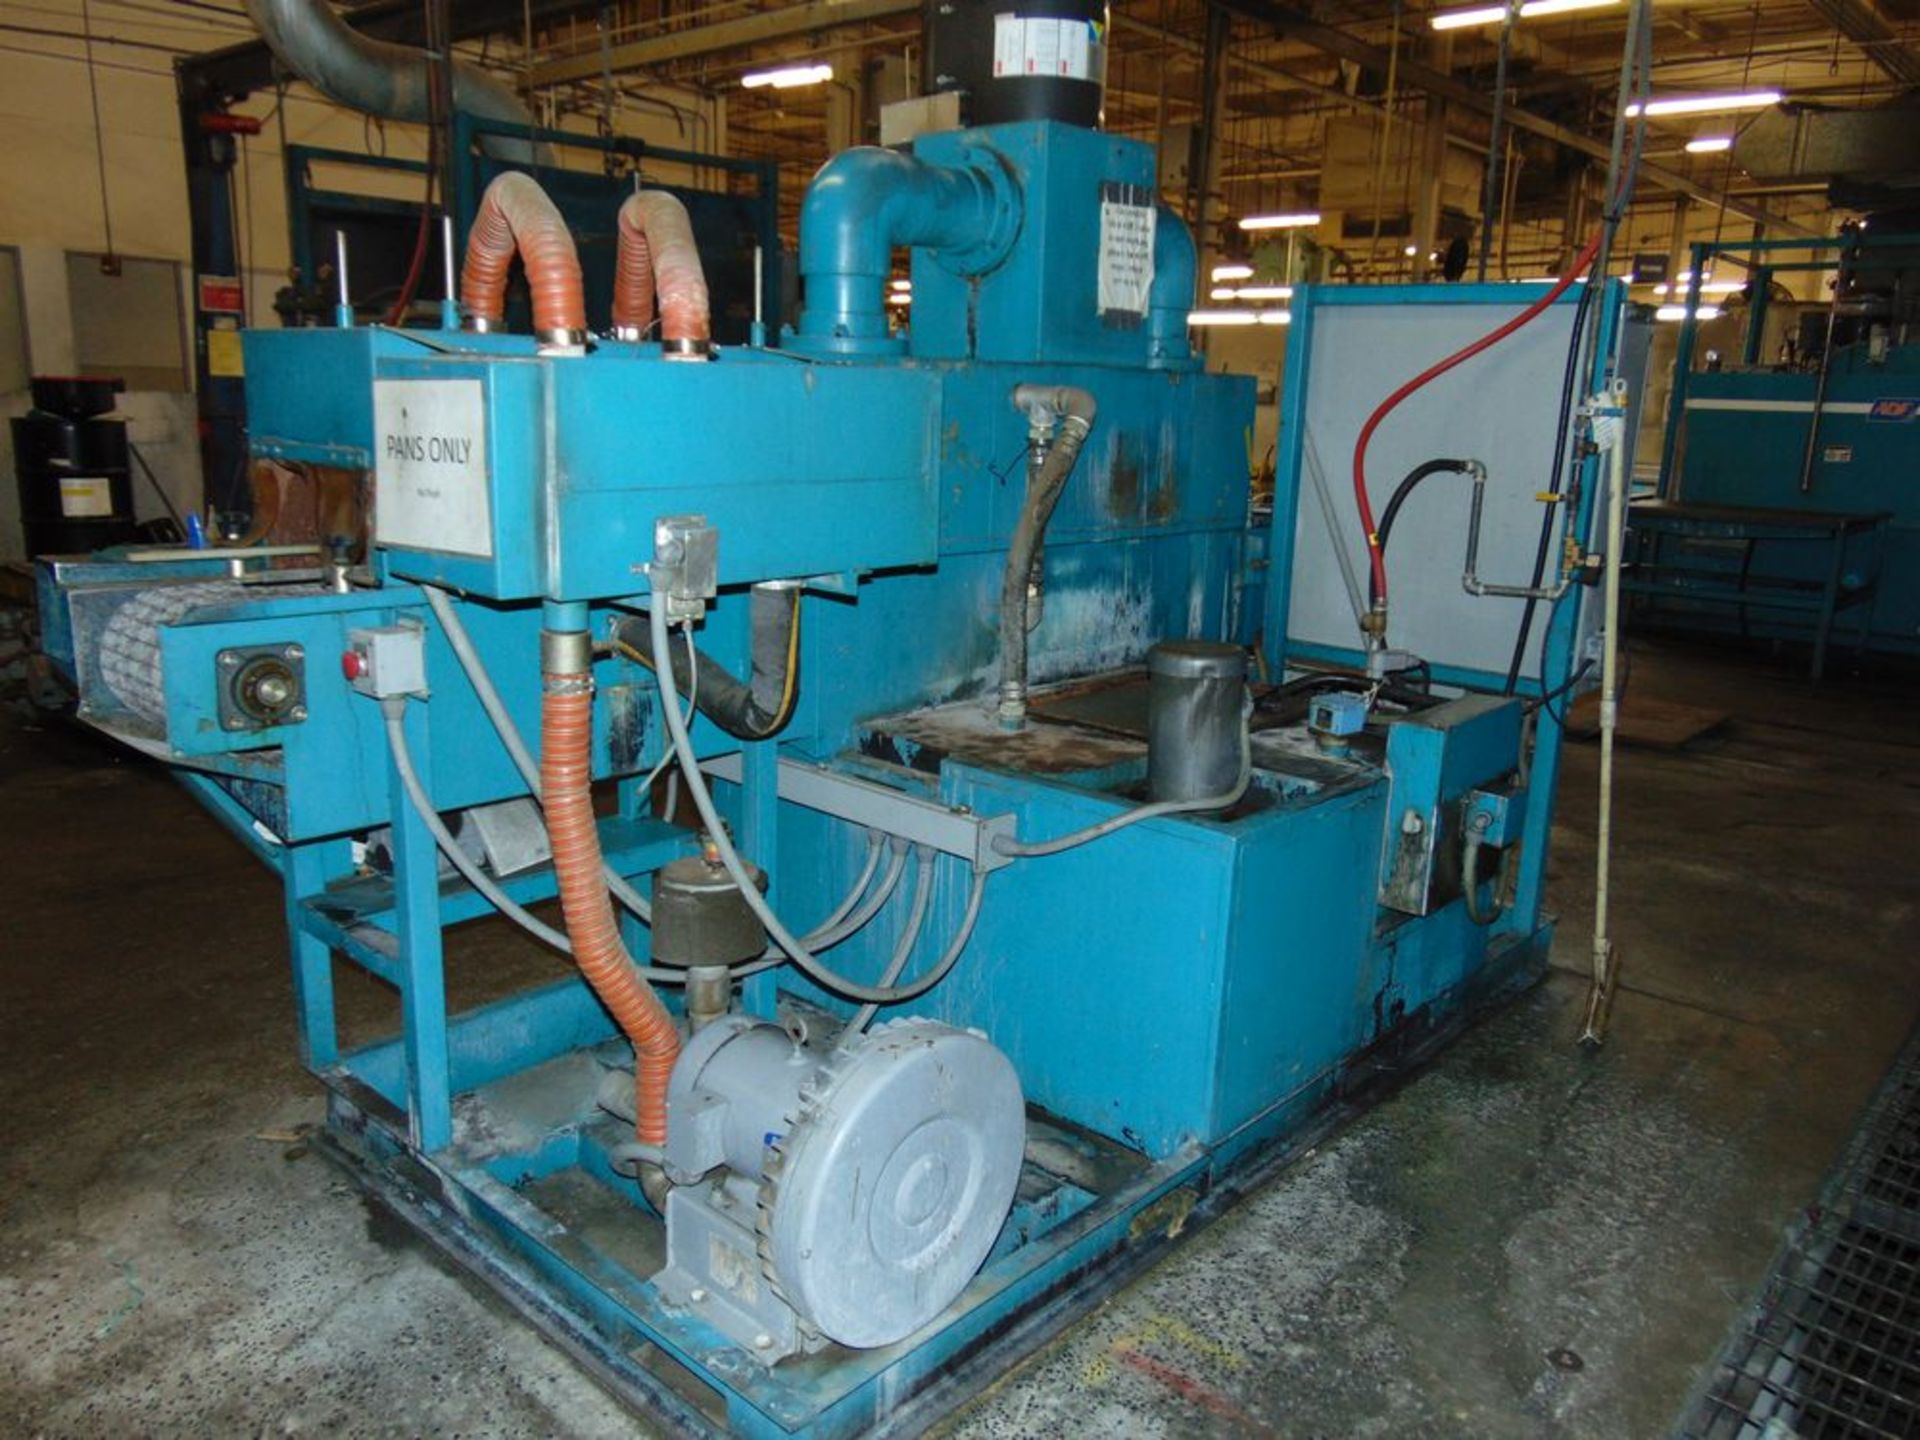 ADF 1' x 6' Conveyorized Parts Washer S/N 299-4492 (LOADING FEES: $450) - Image 3 of 3